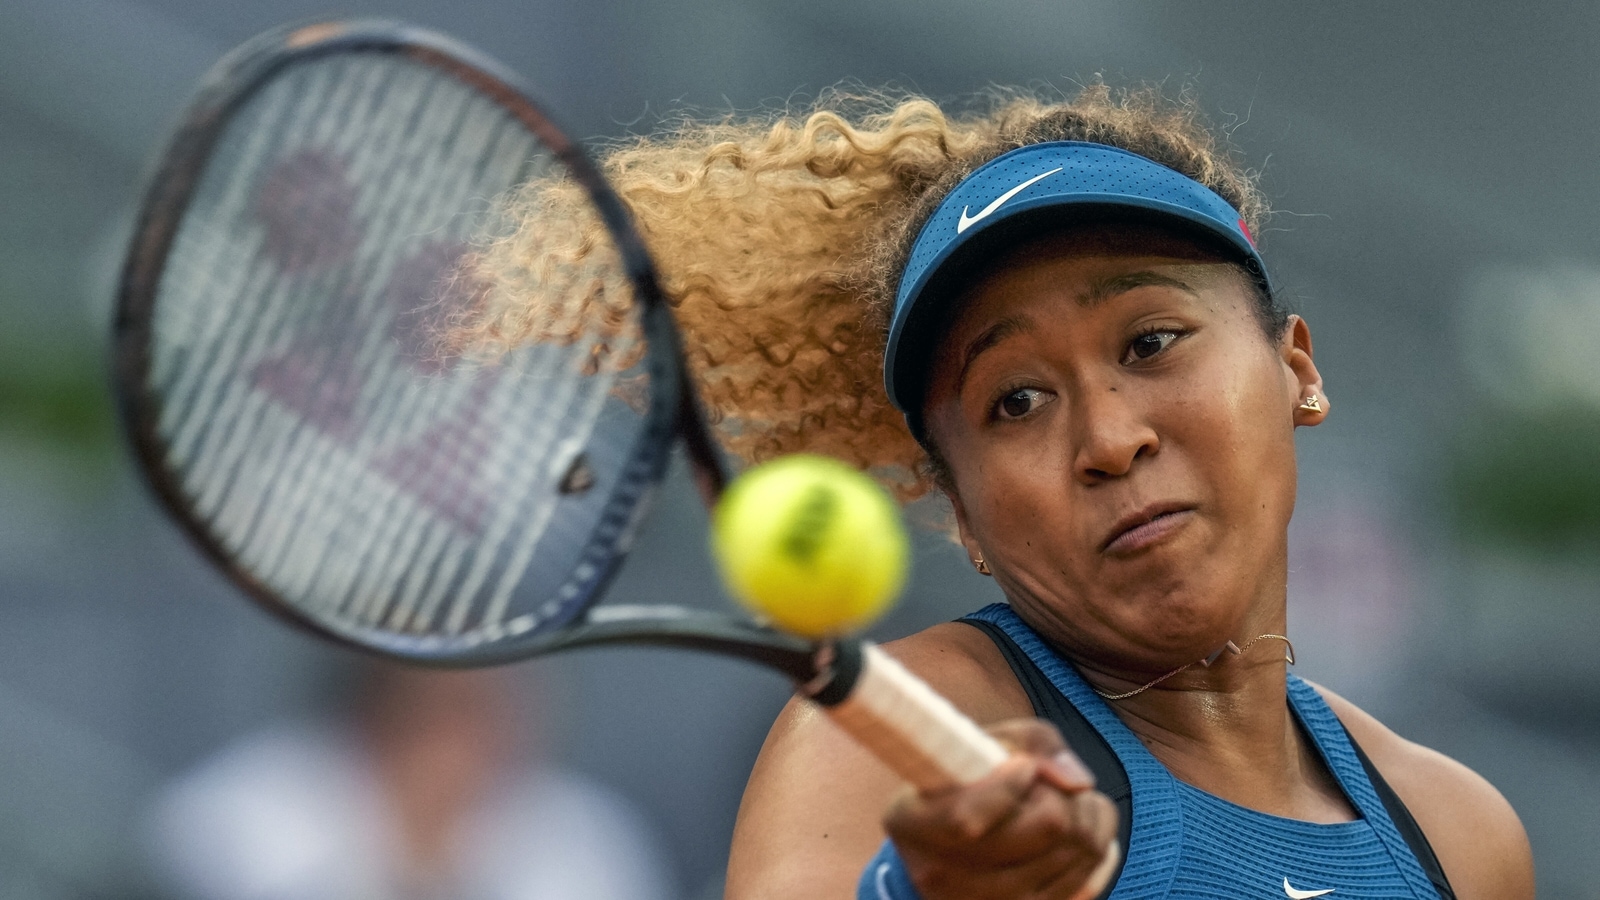 Naomi Osaka announces she is expecting her first child